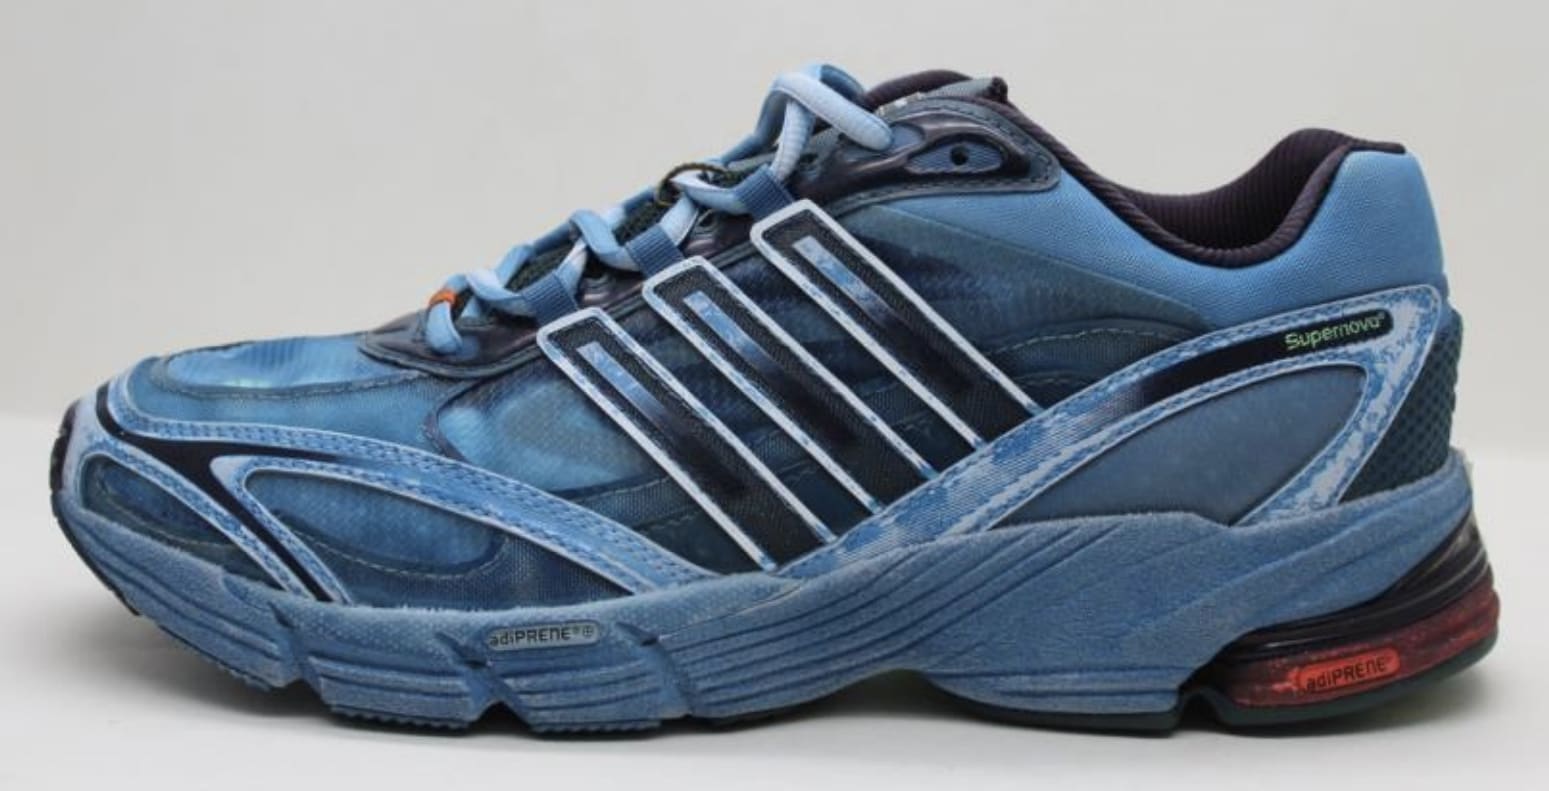 New adidas adiFOM Q Sneaker is Inspired by 2001 adidas Quake (and